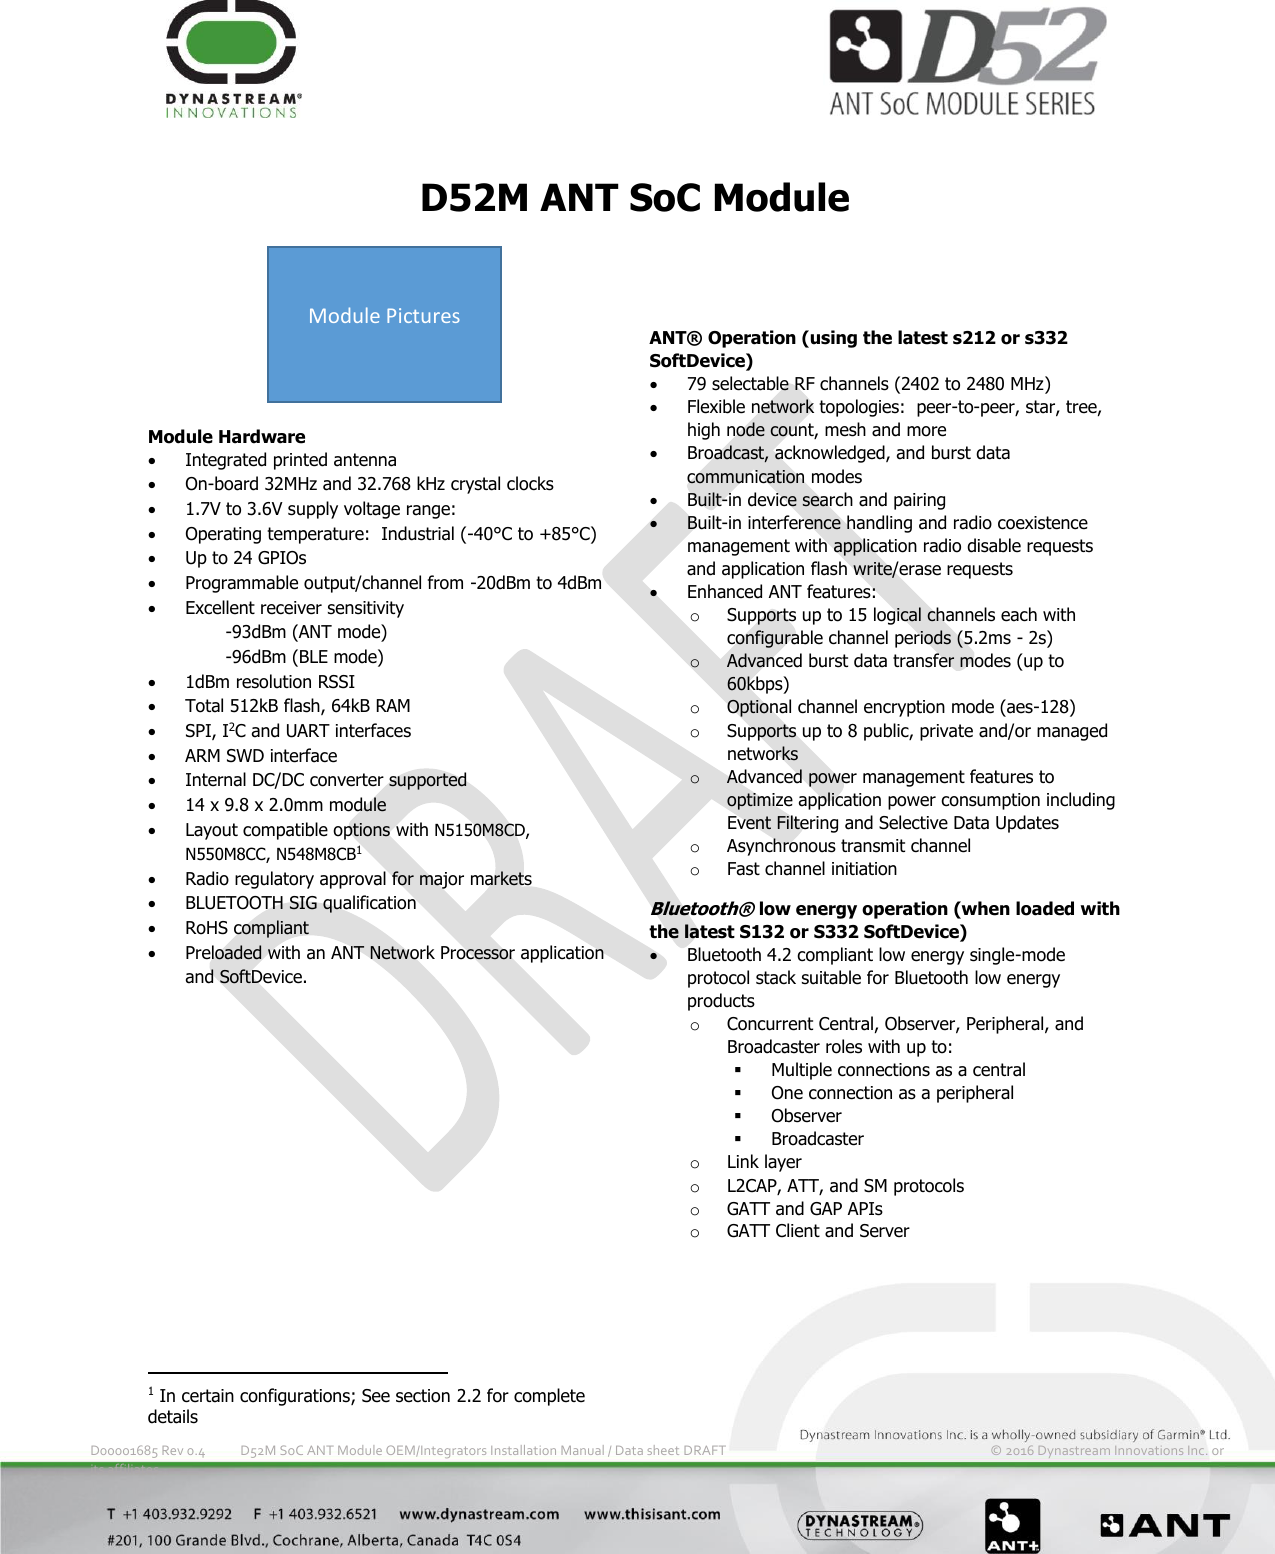         D00001685 Rev 0.4  D52M SoC ANT Module OEM/Integrators Installation Manual / Data sheet DRAFT         © 2016 Dynastream Innovations Inc. or its affiliates D52M ANT SoC Module Module Hardware  Integrated printed antenna   On-board 32MHz and 32.768 kHz crystal clocks  1.7V to 3.6V supply voltage range:  Operating temperature:  Industrial (-40°C to +85°C)  Up to 24 GPIOs   Programmable output/channel from -20dBm to 4dBm  Excellent receiver sensitivity -93dBm (ANT mode) -96dBm (BLE mode)  1dBm resolution RSSI  Total 512kB flash, 64kB RAM  SPI, I2C and UART interfaces  ARM SWD interface  Internal DC/DC converter supported  14 x 9.8 x 2.0mm module   Layout compatible options with N5150M8CD, N550M8CC, N548M8CB1  Radio regulatory approval for major markets   BLUETOOTH SIG qualification  RoHS compliant  Preloaded with an ANT Network Processor application and SoftDevice.   ANT® Operation (using the latest s212 or s332 SoftDevice)  79 selectable RF channels (2402 to 2480 MHz)  Flexible network topologies:  peer-to-peer, star, tree, high node count, mesh and more  Broadcast, acknowledged, and burst data communication modes  Built-in device search and pairing  Built-in interference handling and radio coexistence management with application radio disable requests and application flash write/erase requests  Enhanced ANT features: o Supports up to 15 logical channels each with configurable channel periods (5.2ms - 2s) o Advanced burst data transfer modes (up to 60kbps) o Optional channel encryption mode (aes-128) o Supports up to 8 public, private and/or managed networks o Advanced power management features to optimize application power consumption including Event Filtering and Selective Data Updates o Asynchronous transmit channel o Fast channel initiation Bluetooth® low energy operation (when loaded with the latest S132 or S332 SoftDevice)  Bluetooth 4.2 compliant low energy single-mode protocol stack suitable for Bluetooth low energy products o Concurrent Central, Observer, Peripheral, and Broadcaster roles with up to:  Multiple connections as a central  One connection as a peripheral  Observer  Broadcaster o Link layer o L2CAP, ATT, and SM protocols o GATT and GAP APIs o GATT Client and Server                                                             1 In certain configurations; See section 2.2 for complete details Module Pictures 